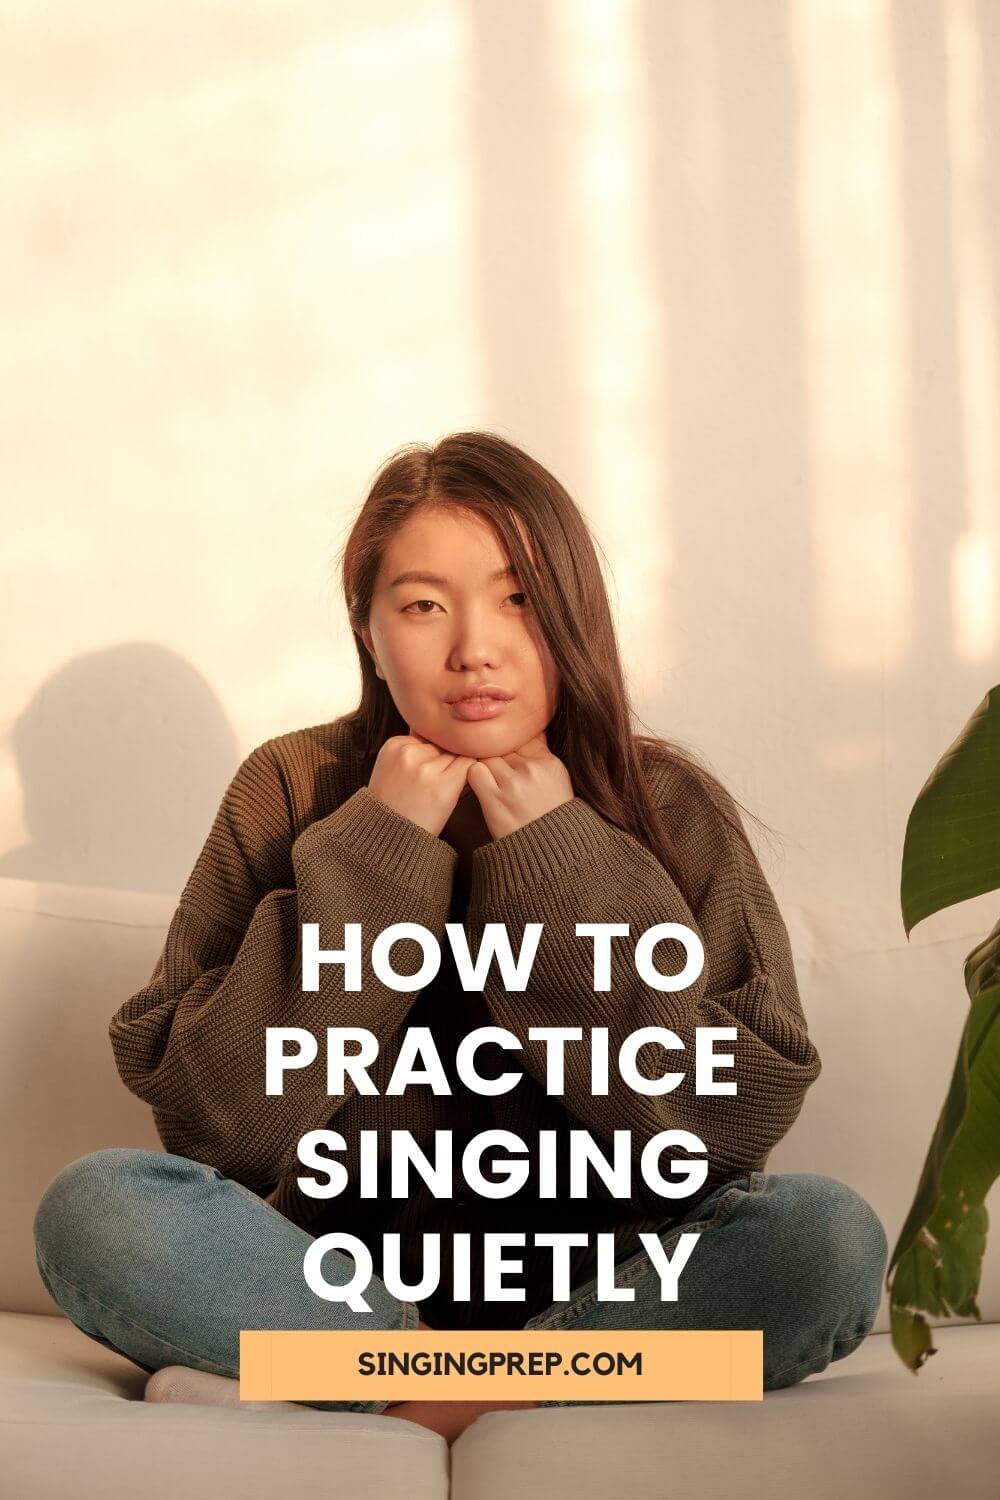 How to practice singing quietly pin